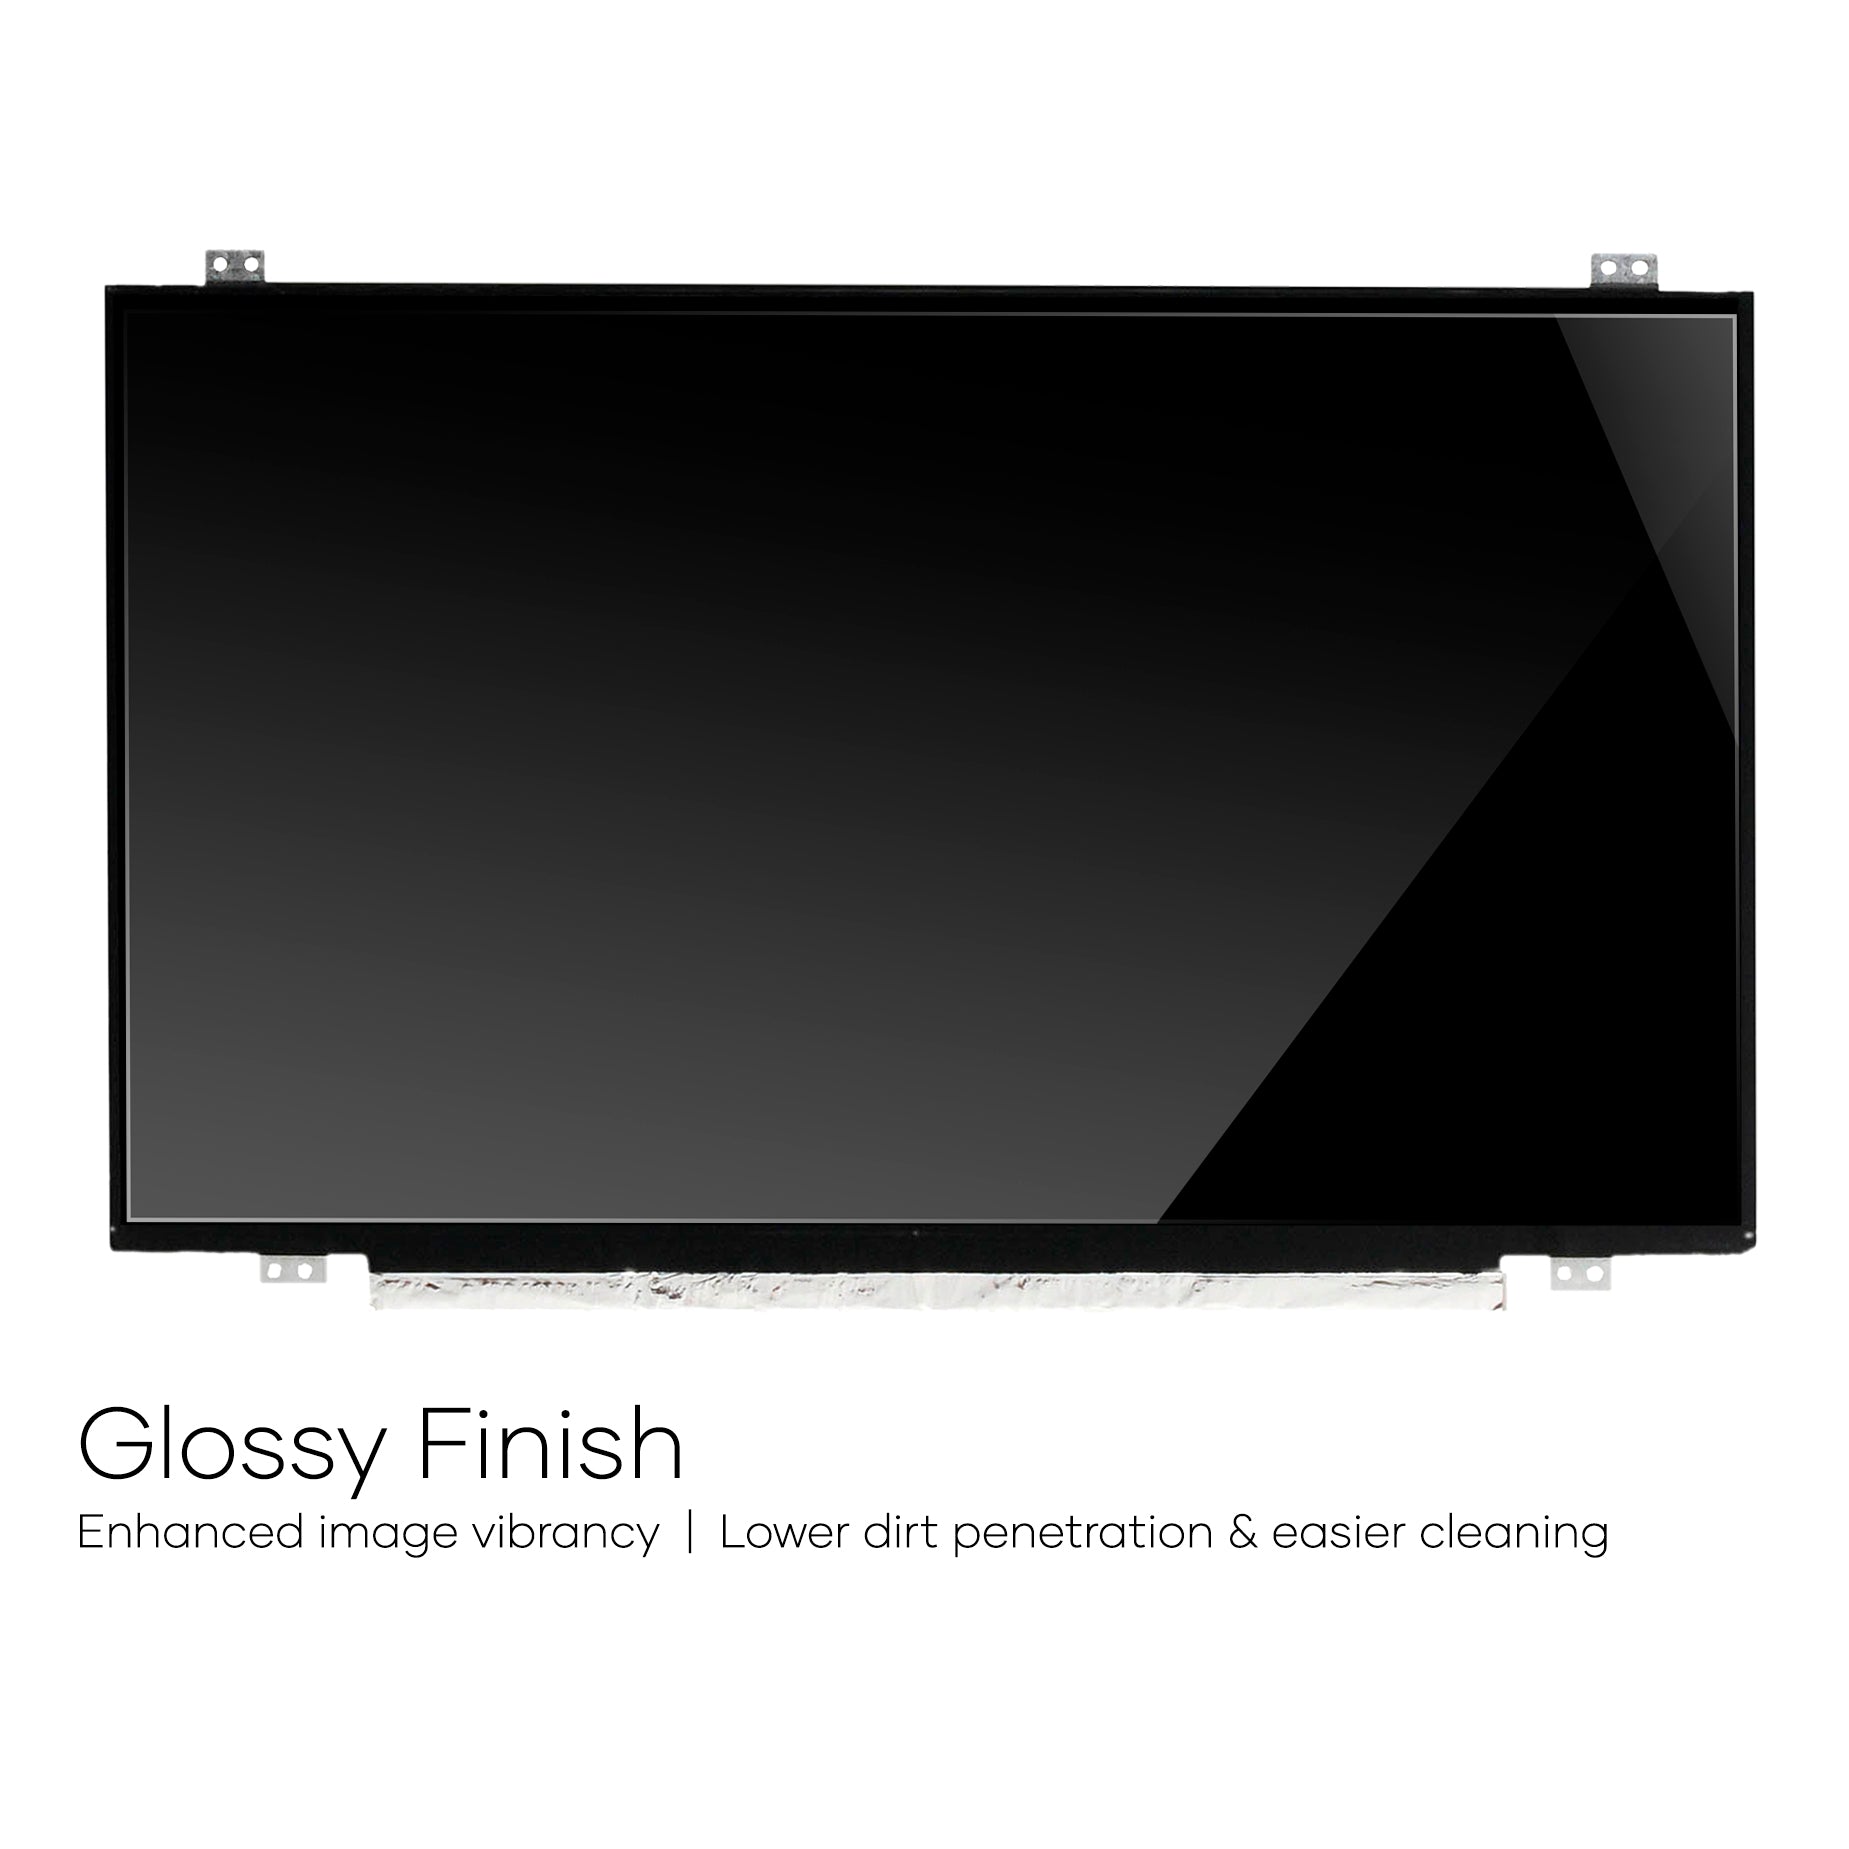 Screen Replacement for Lenovo Thinkpad L480 HD 1366x768 Glossy LCD LED Display